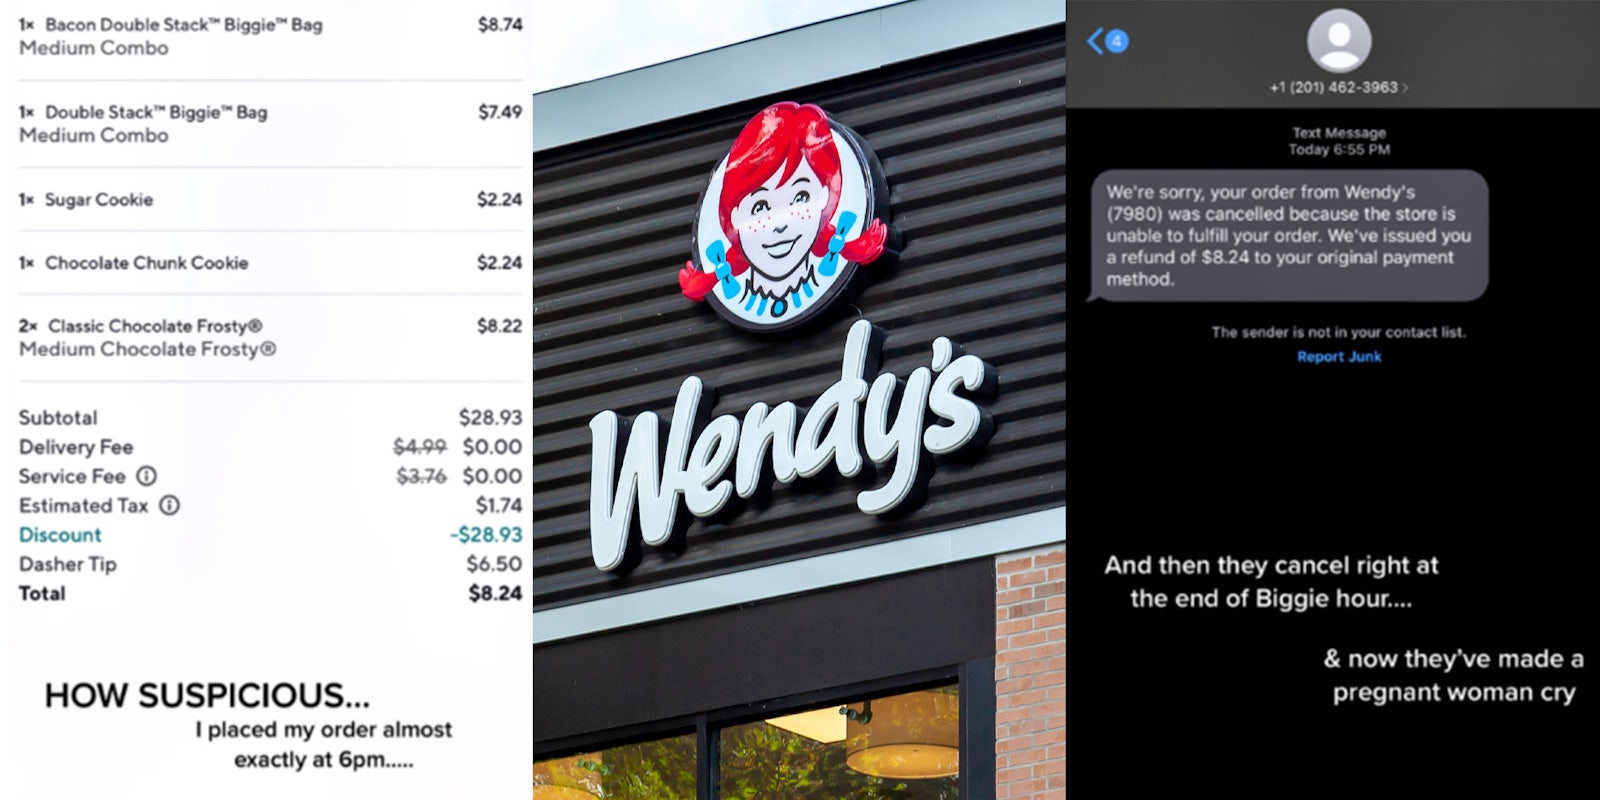 Woman says Wendy's canceled her order as soon as Biggie hour finished despite her placing it at 6pm